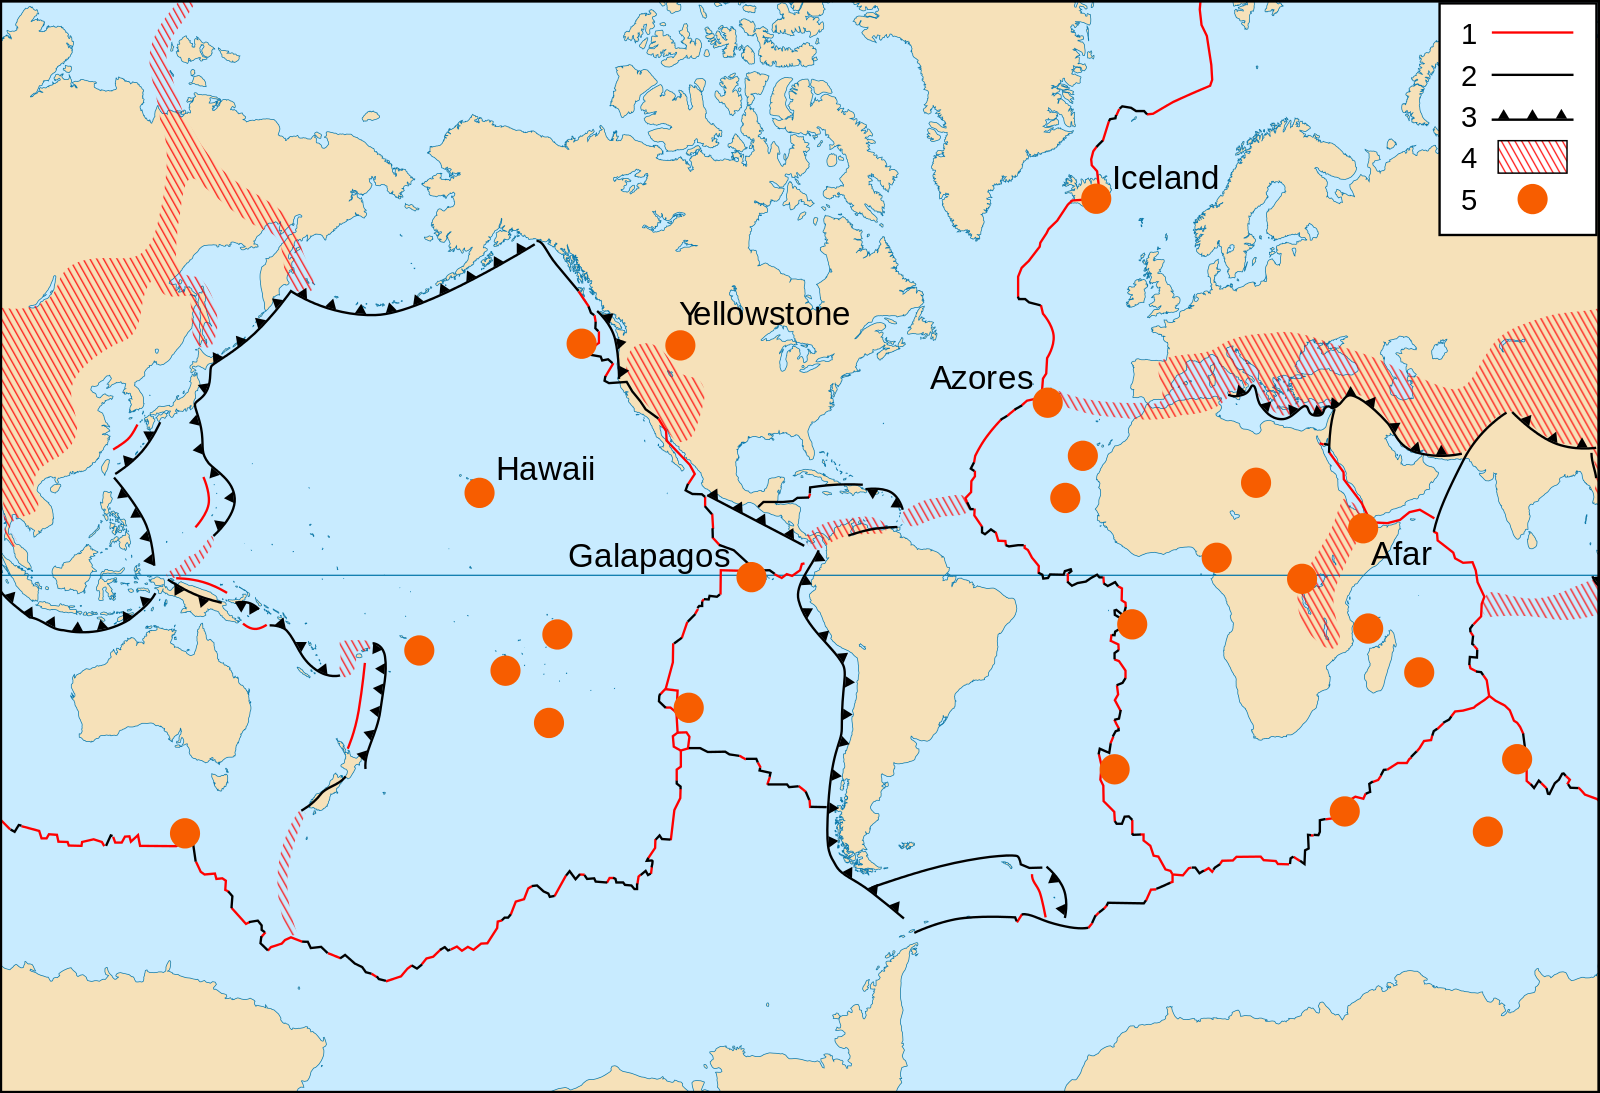 World map showing the locations of selected prominent hotspots; those labelled are mentioned in the text.